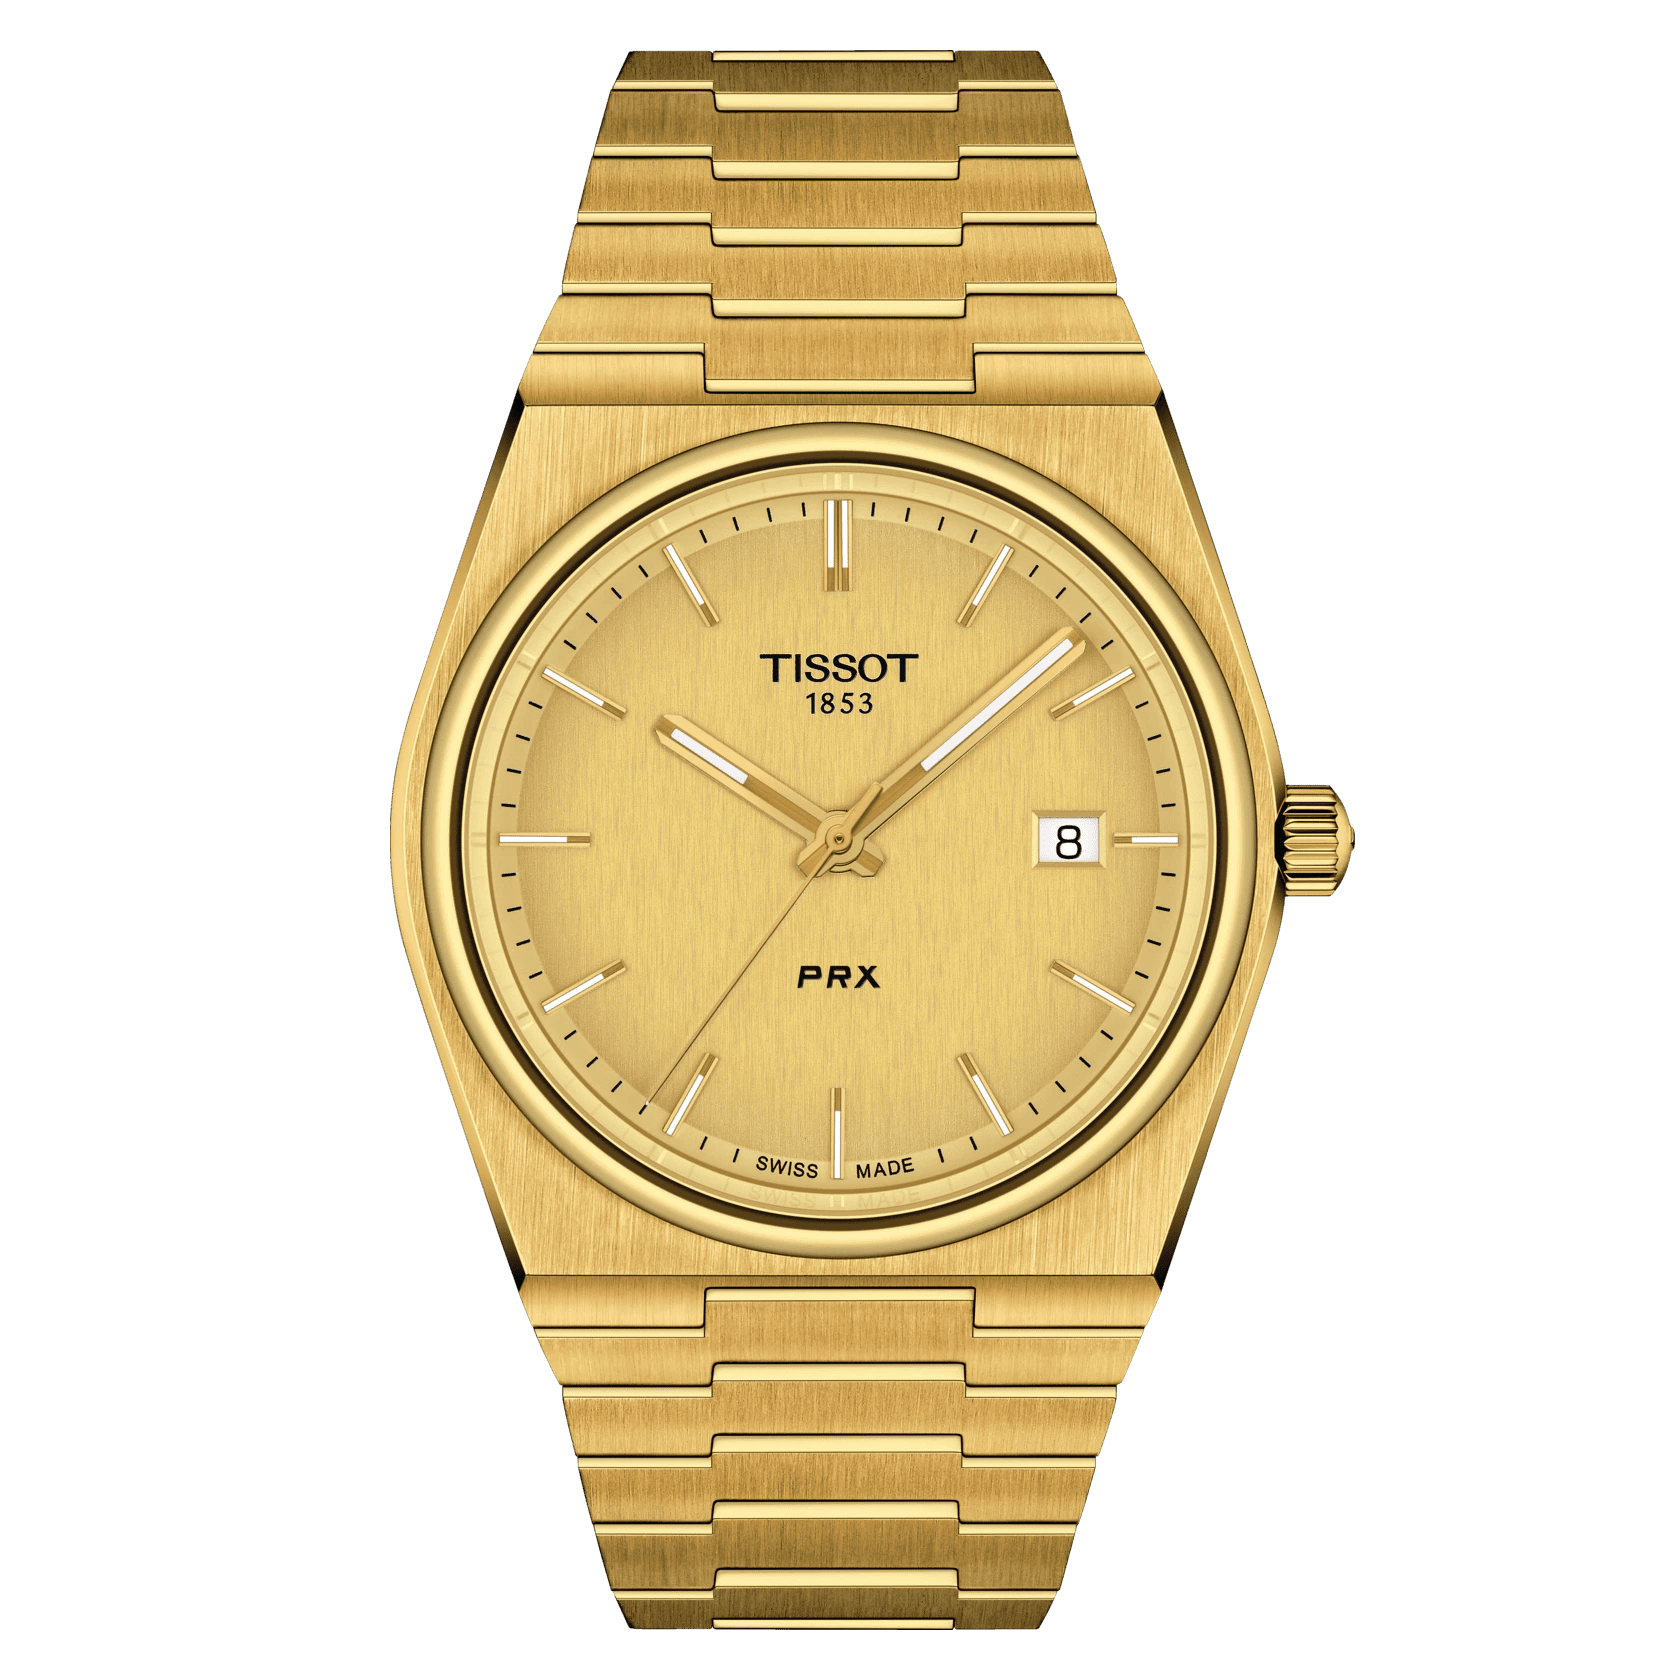 Tissot PRX Yellow Gold PVD Stainless Steel Men's Watch